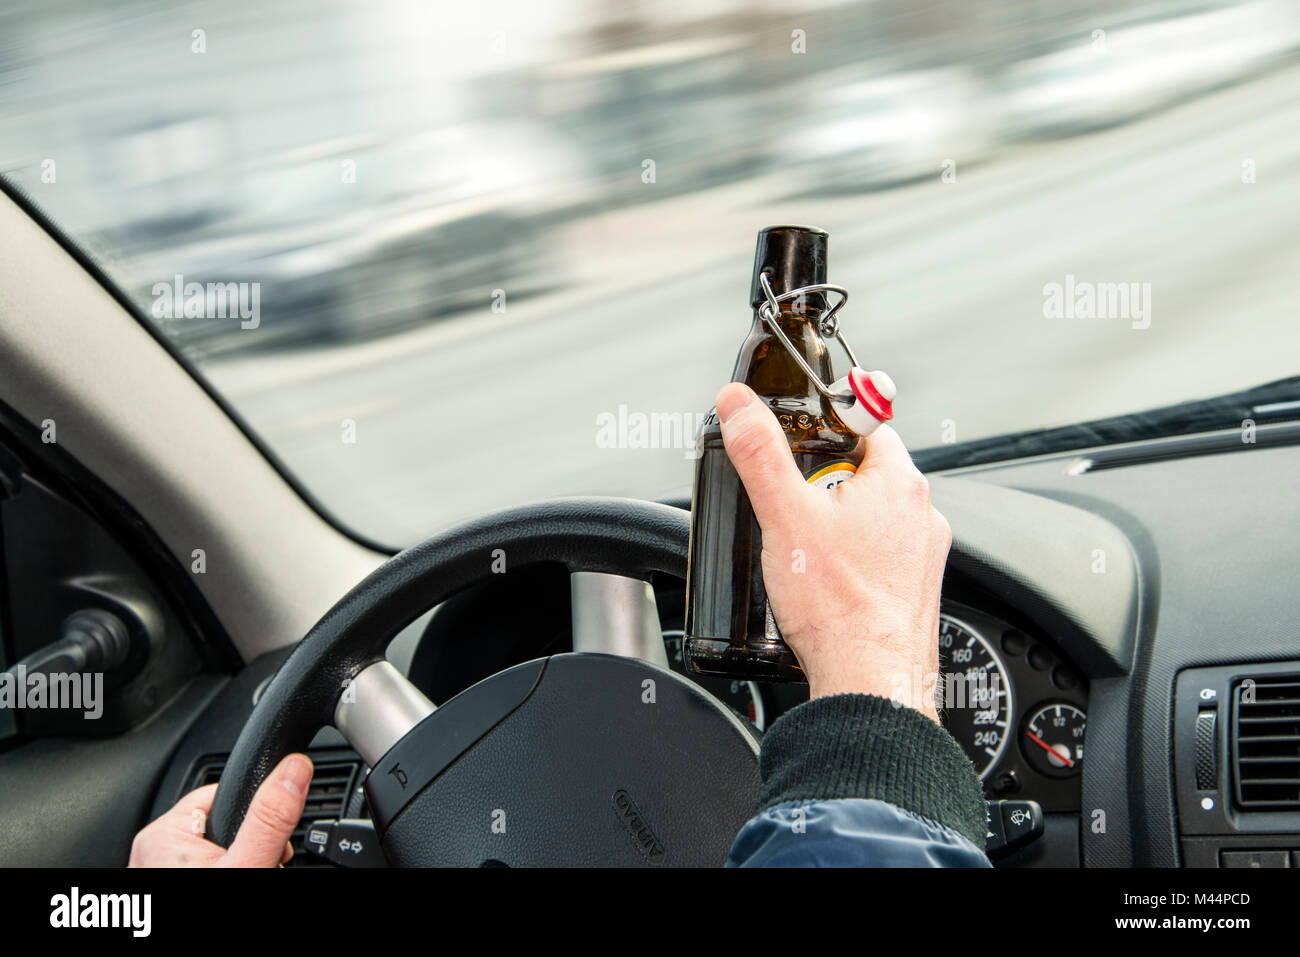 Opened bottle of beer and hands on the steering wheel of a car Stock Photo